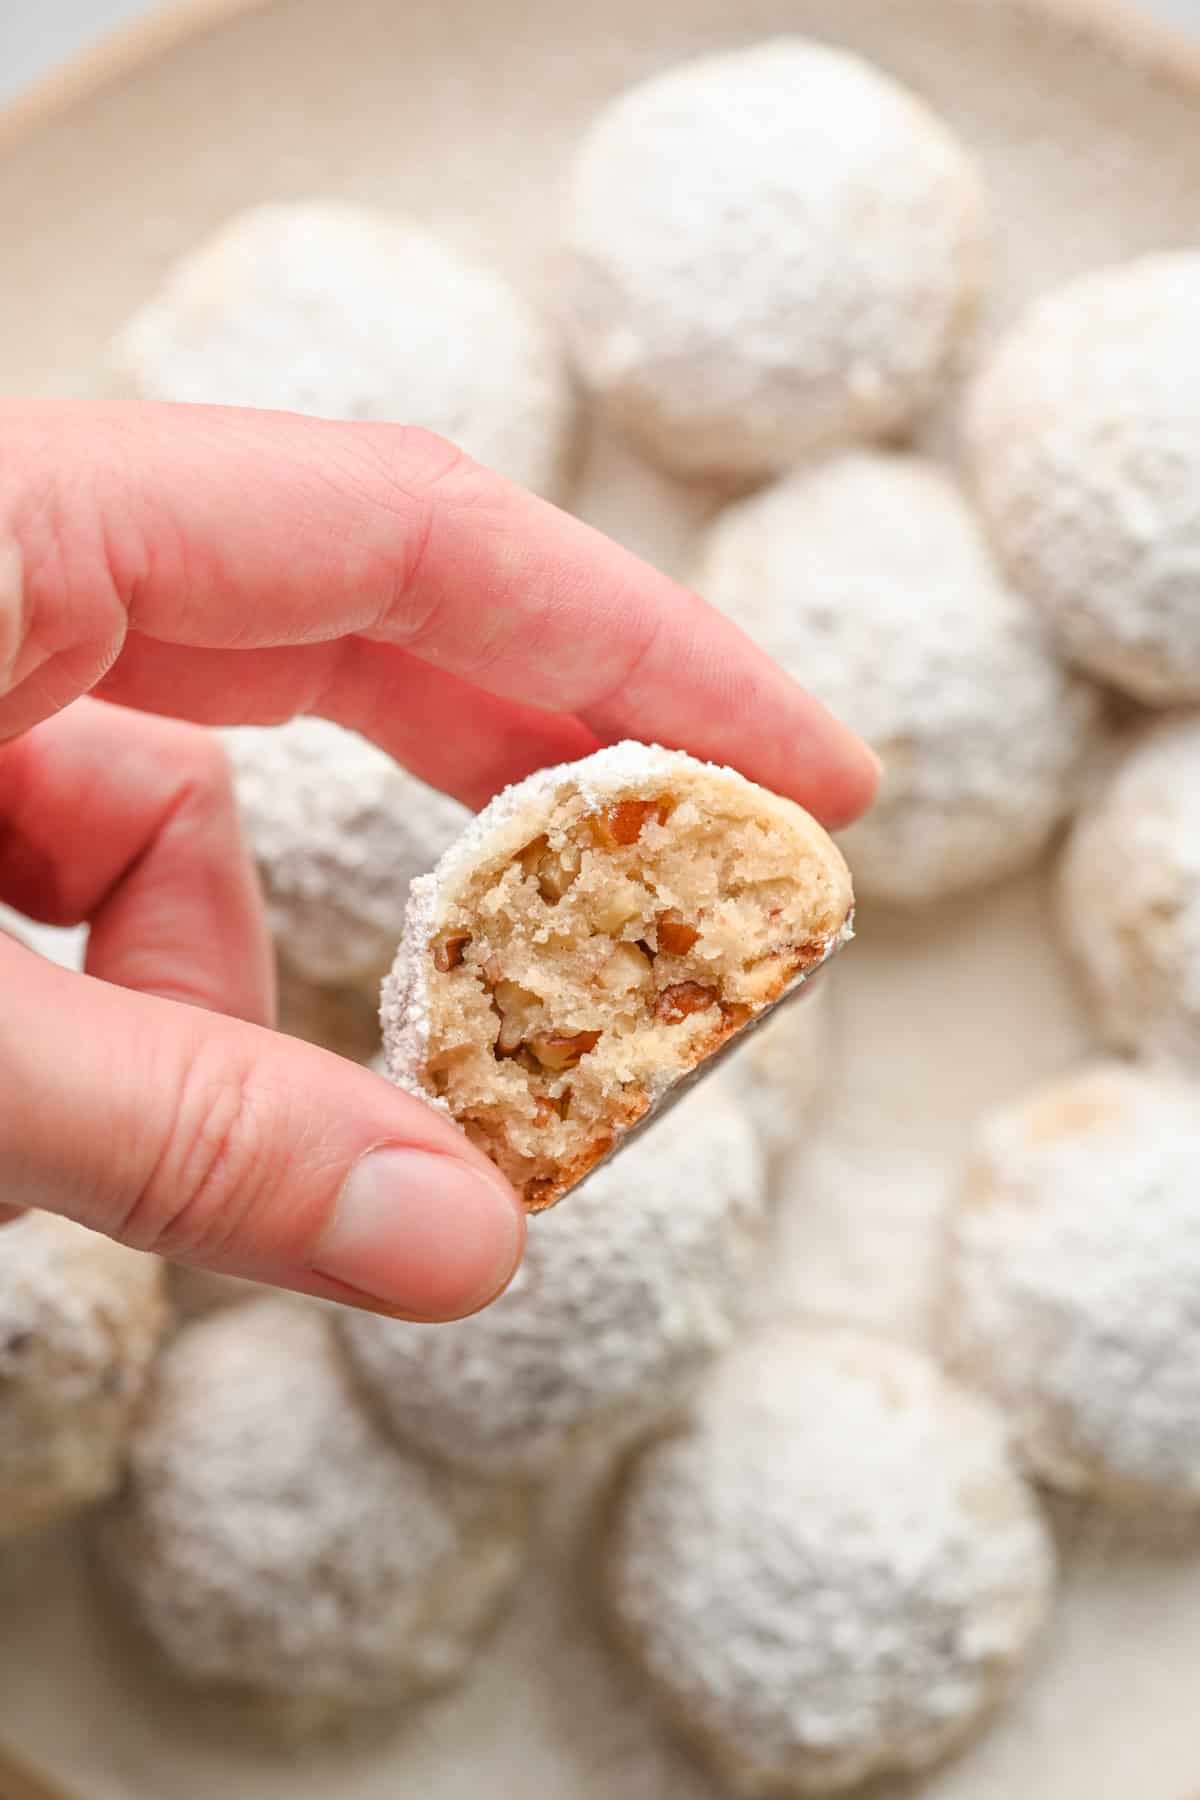 Hand holding a pecan snowball cookie with a bite taken out to show inside texture.